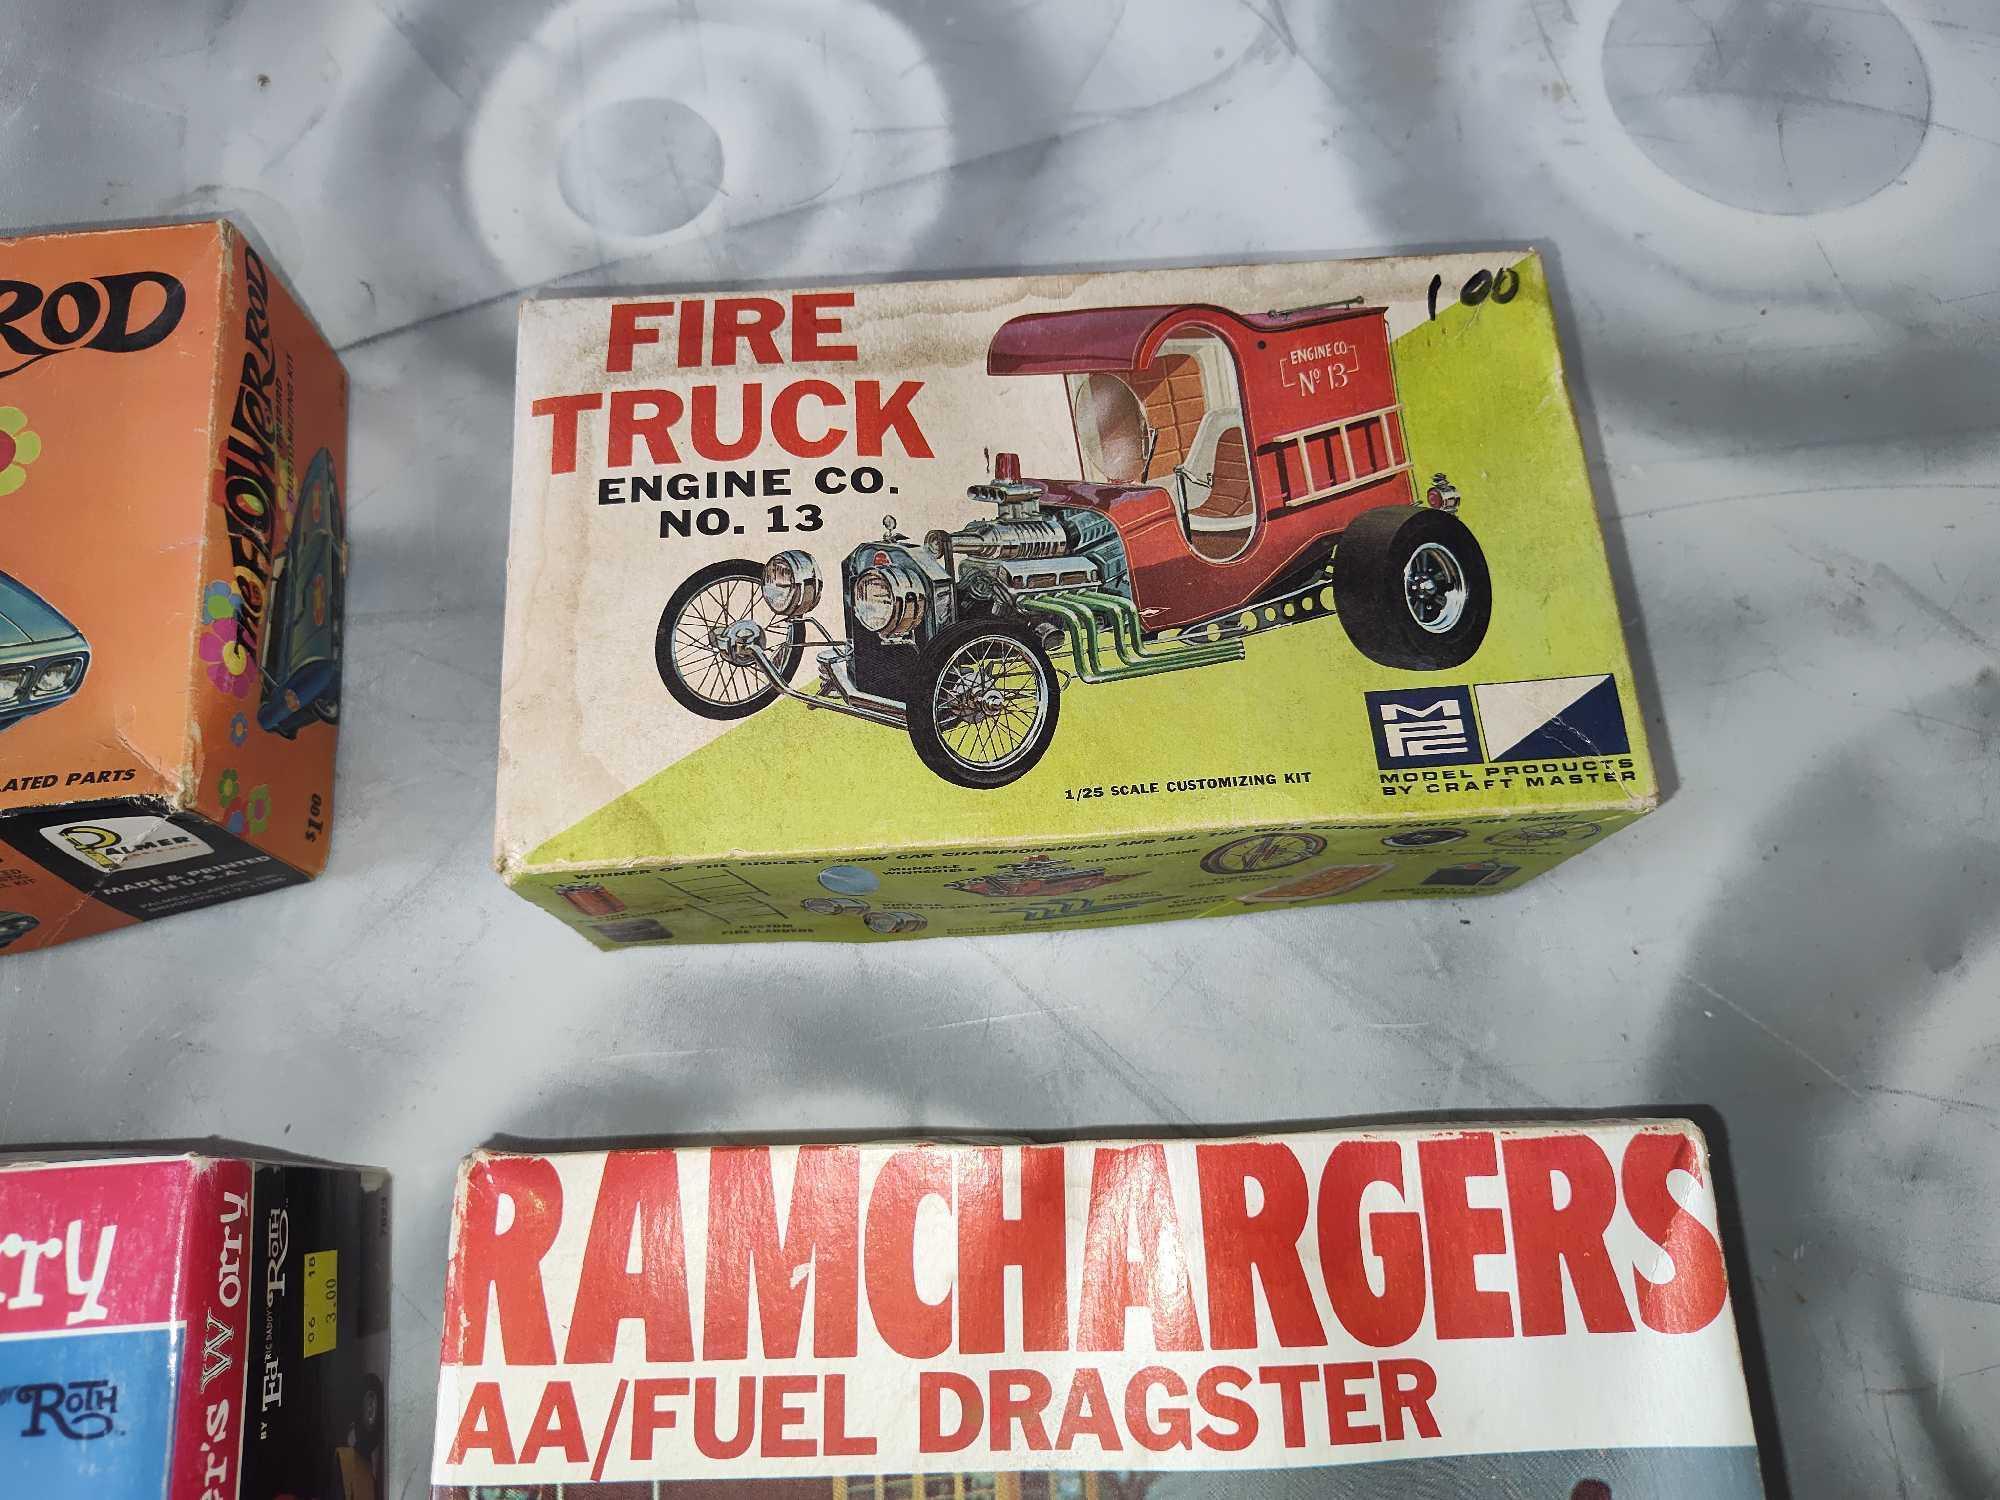 Model Kits Mother's Worry, Flower Rod, Fire Truck, Dragster